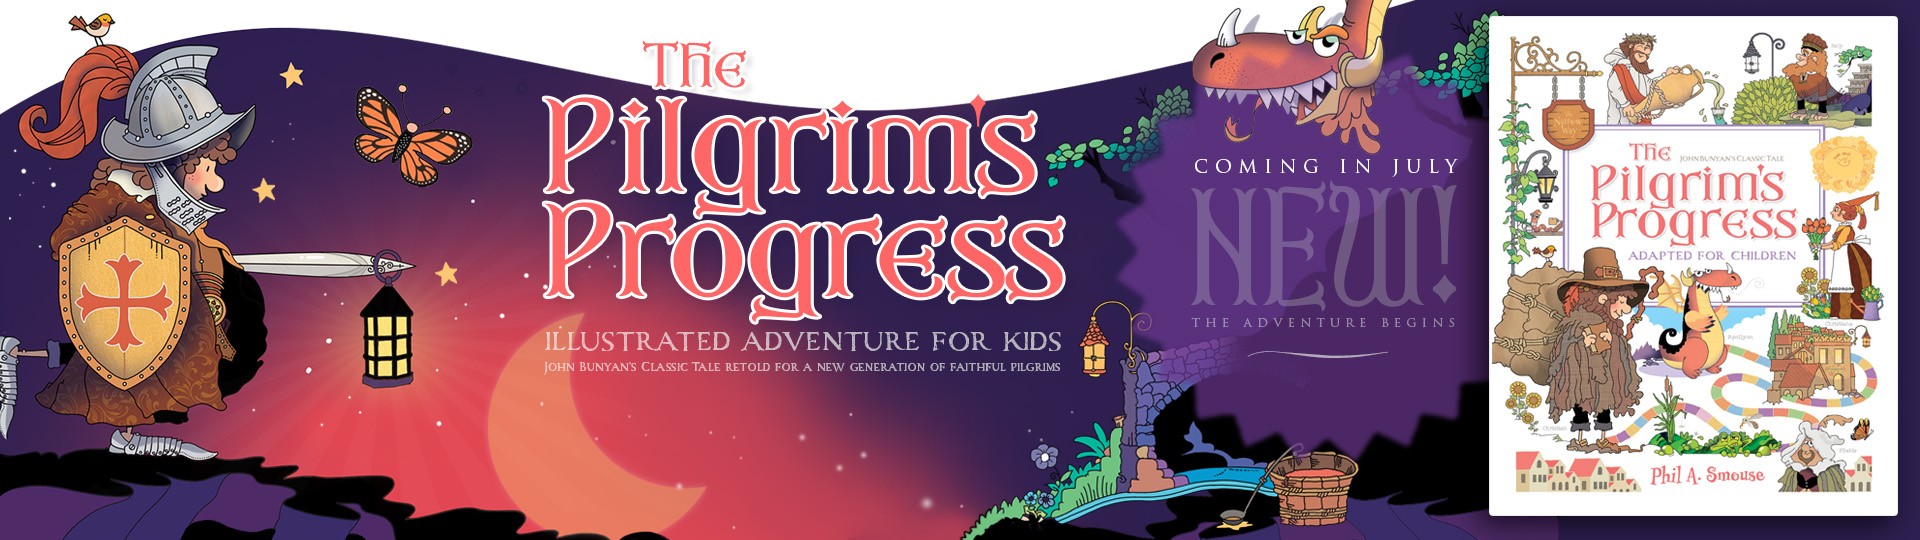 The Pilgrim's Progress Illustrated Adventure for Kids - Phil A. Smouse